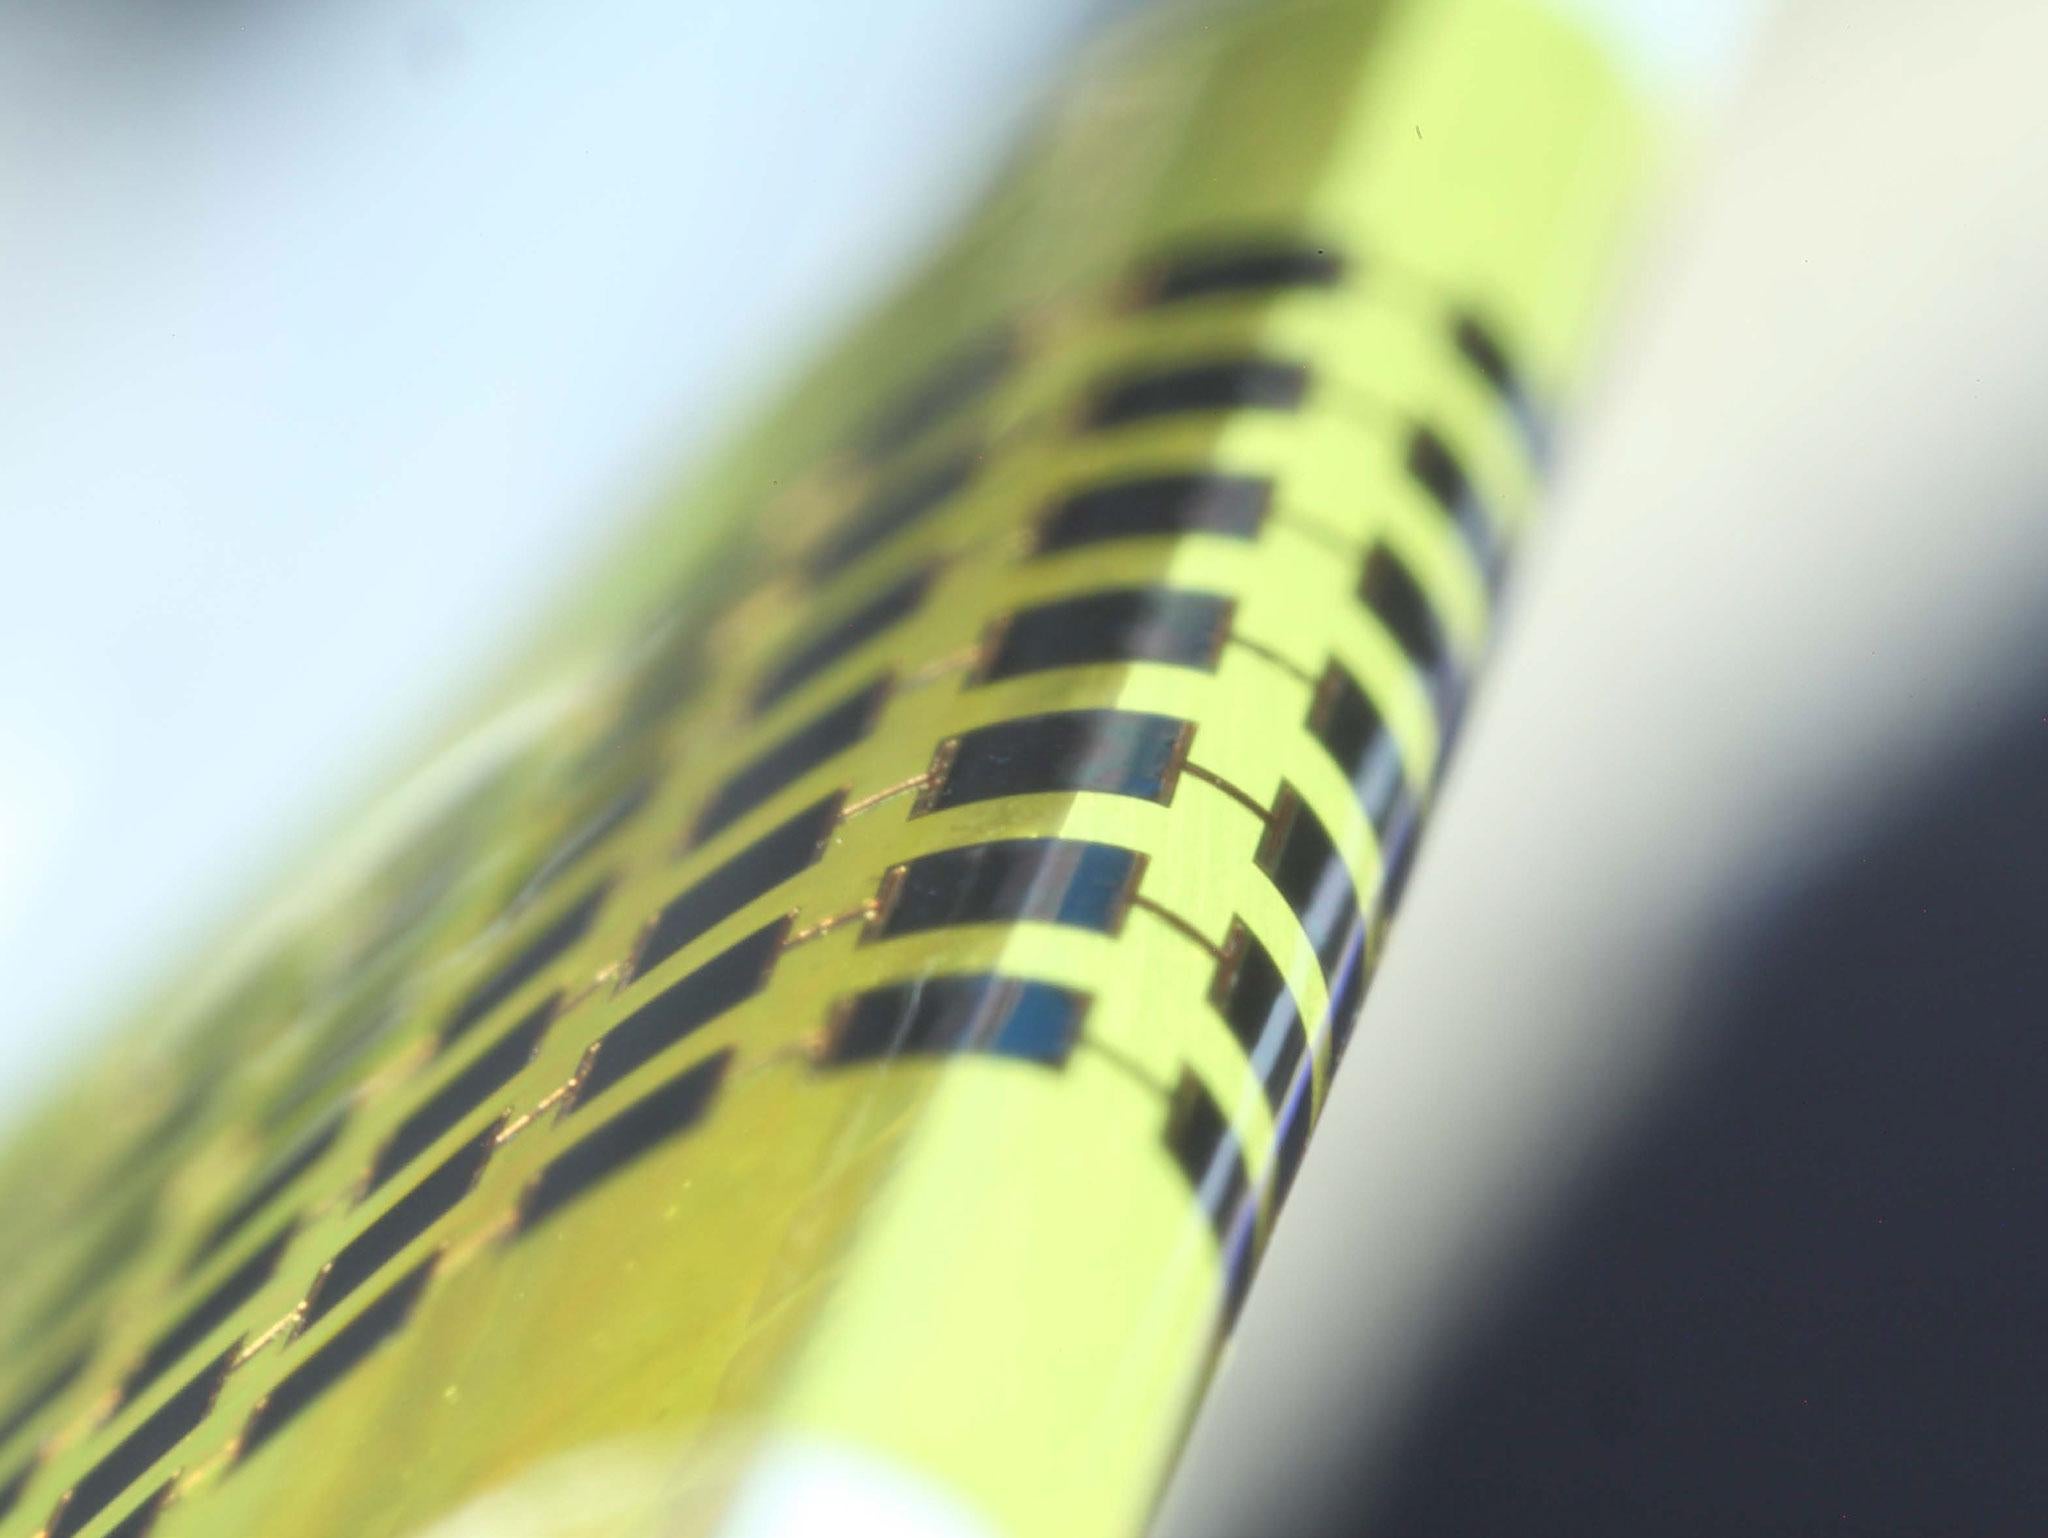 Ultra-thin solar cells are flexible enough to bend around small objects, such as the 1 mm-thick edge of a glass slide.